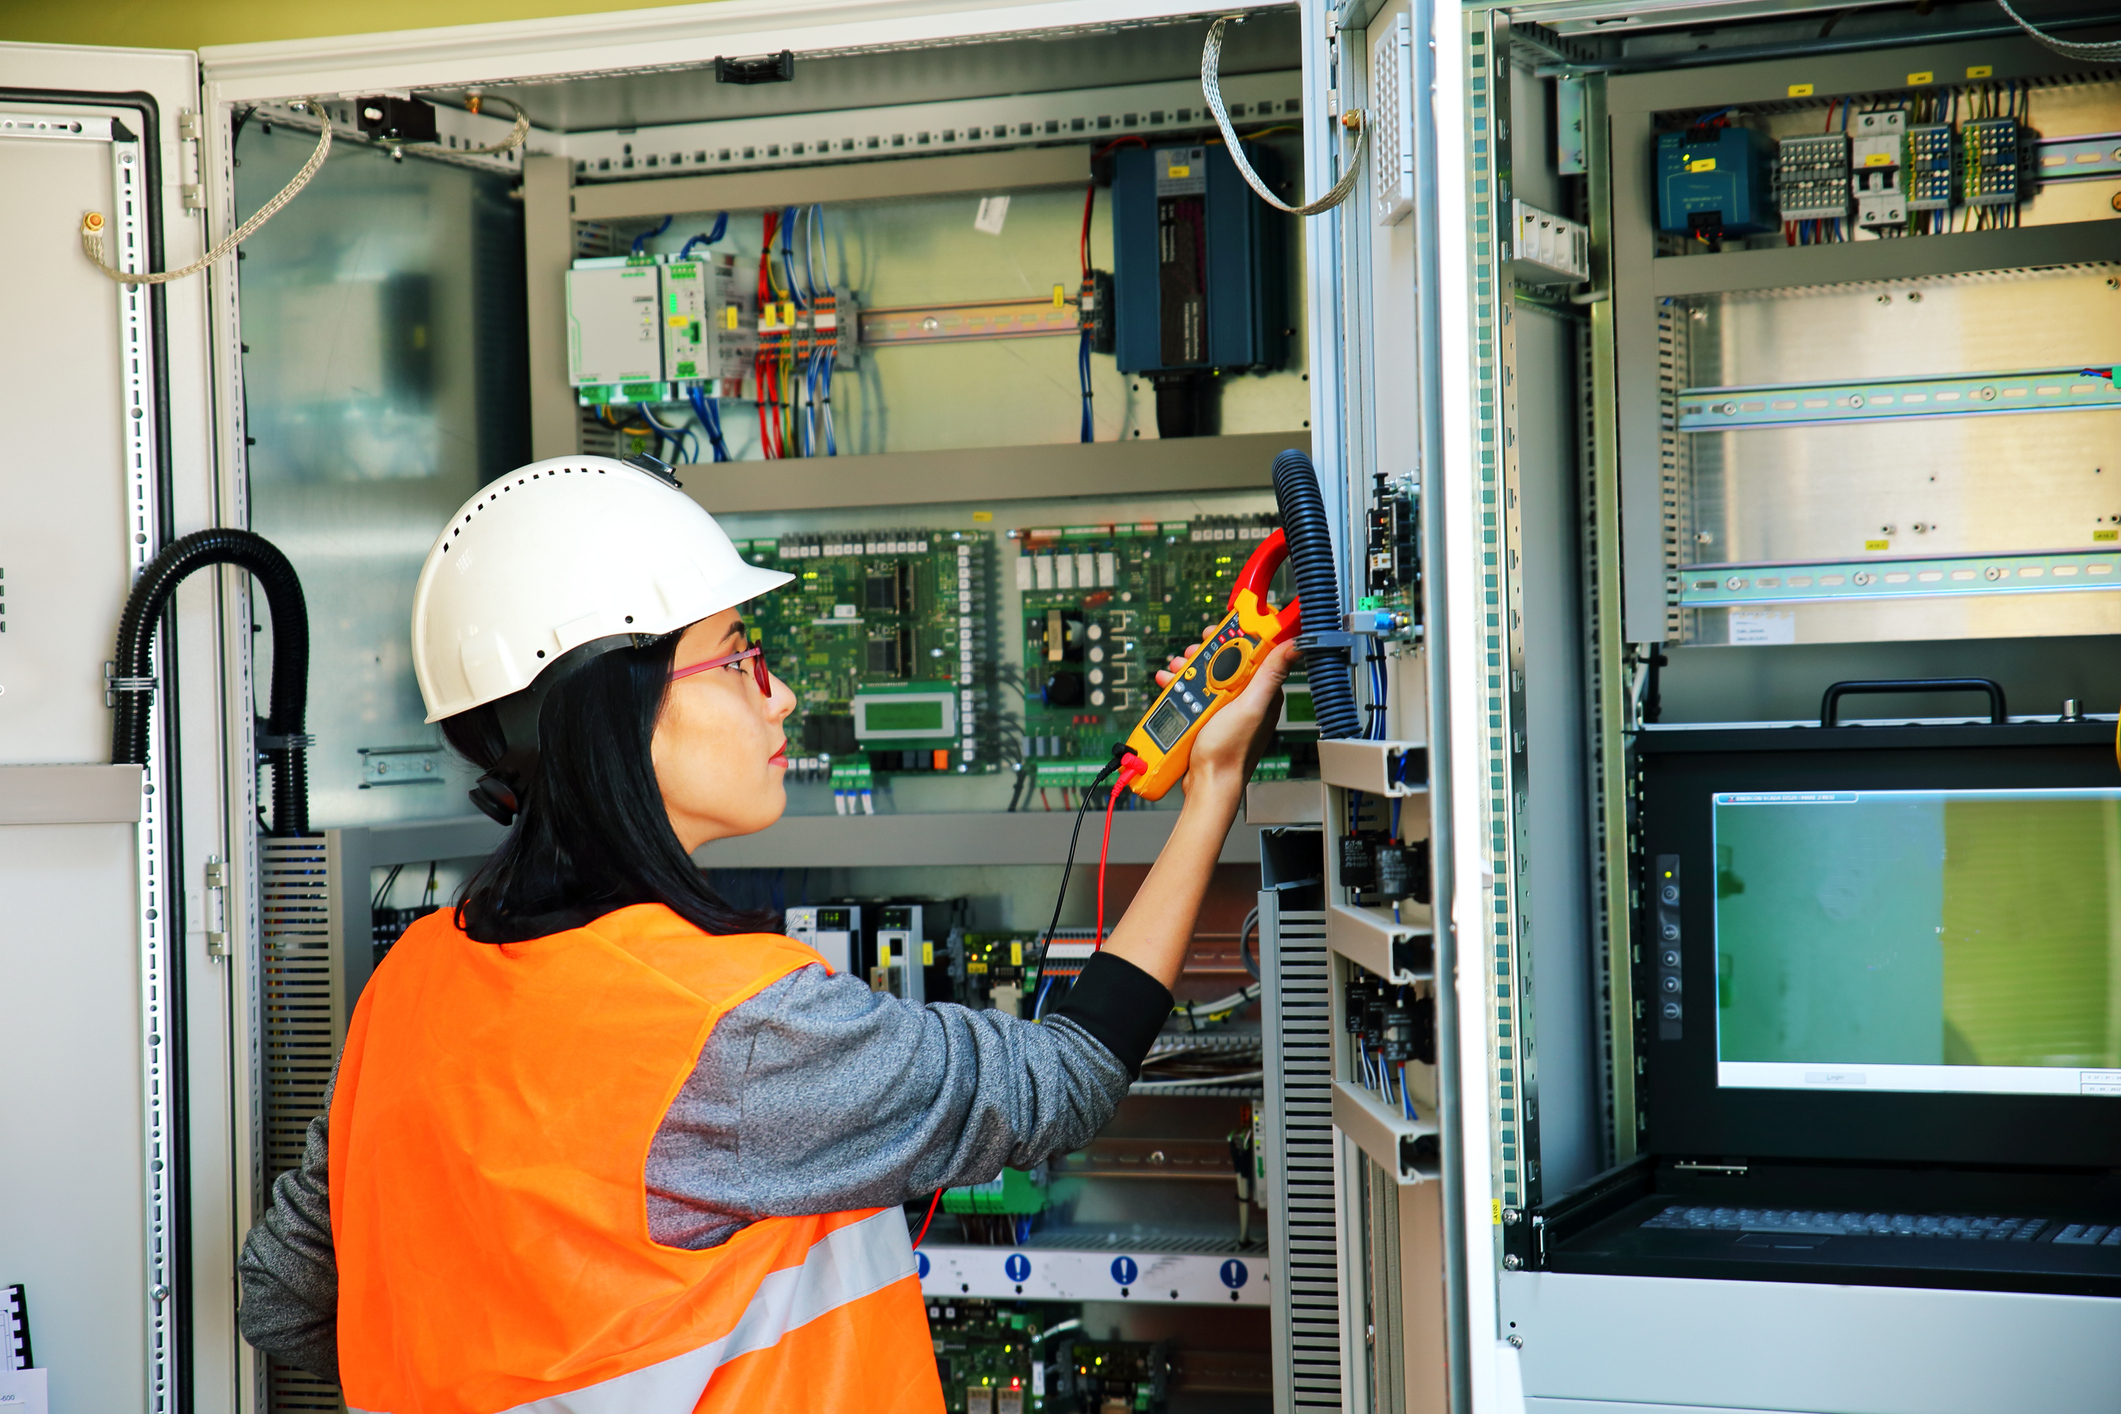  A new path for electricians with foreign qualifications to work in Victoria